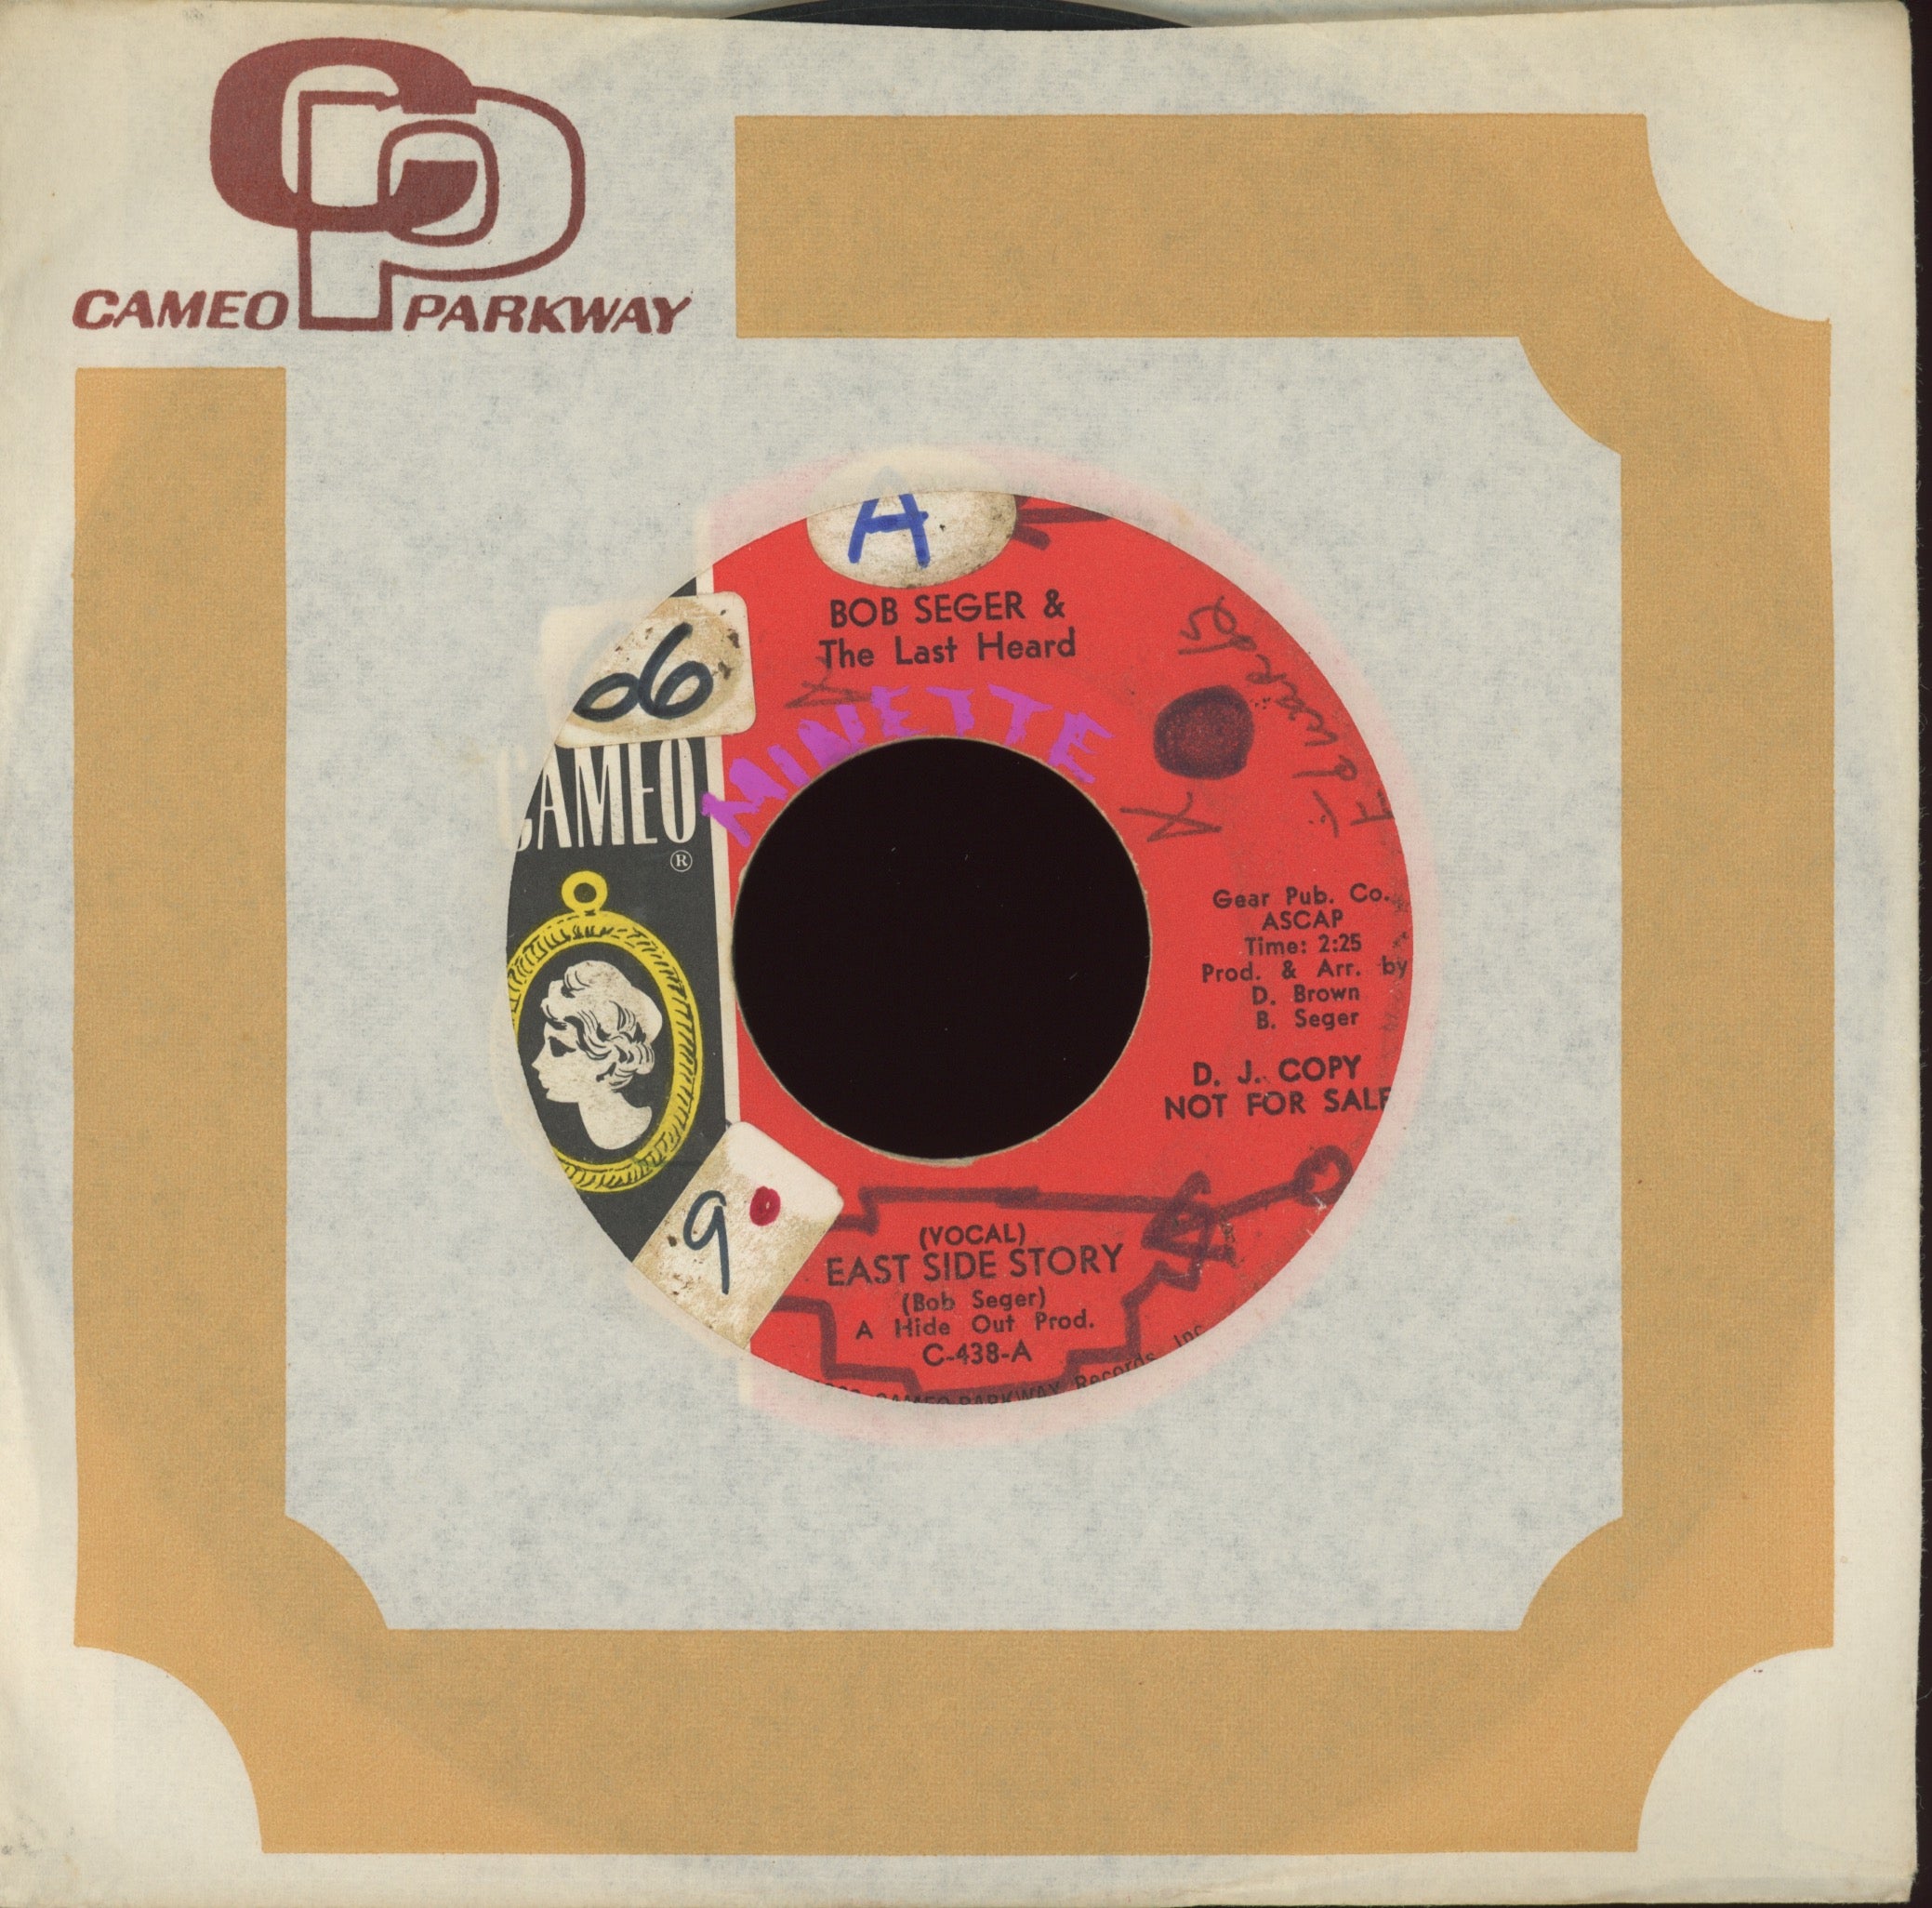 Bob Seger And The Last Heard - East Side Story on Cameo Promo Garage 45